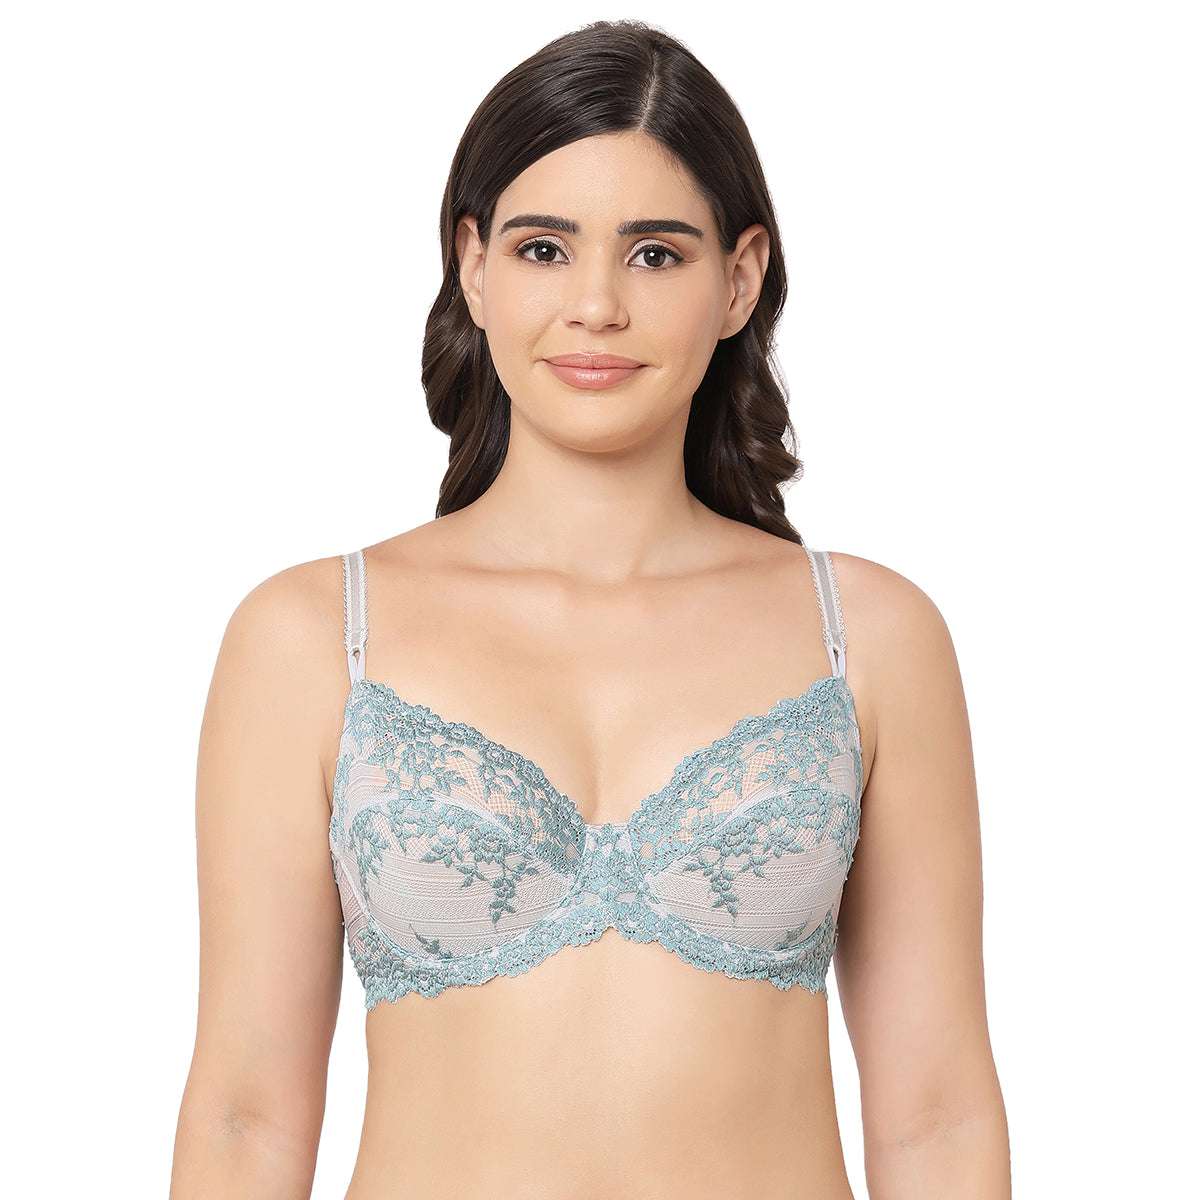 Buy FASHION COMFORTZ Lace Minimizer bra - 3 Lingerie Set Online at Low  Prices in India 